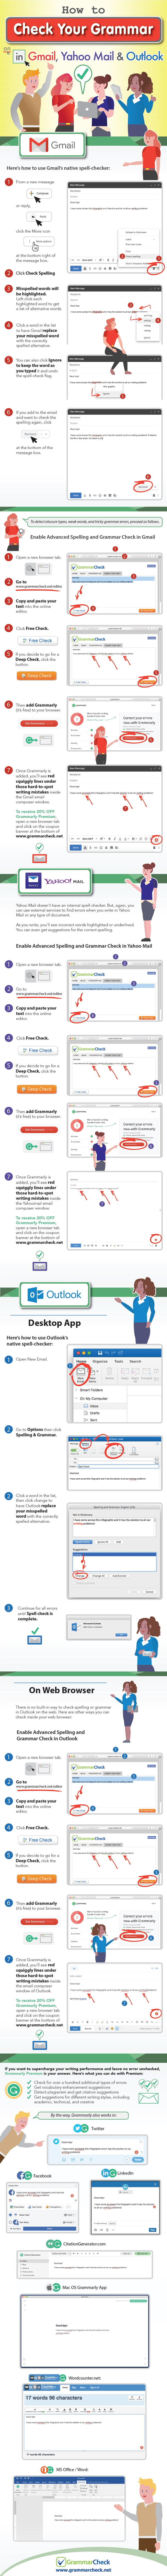 How to Check Your Grammar in Gmail, Yahoo Mail & Outlook (Infographic)